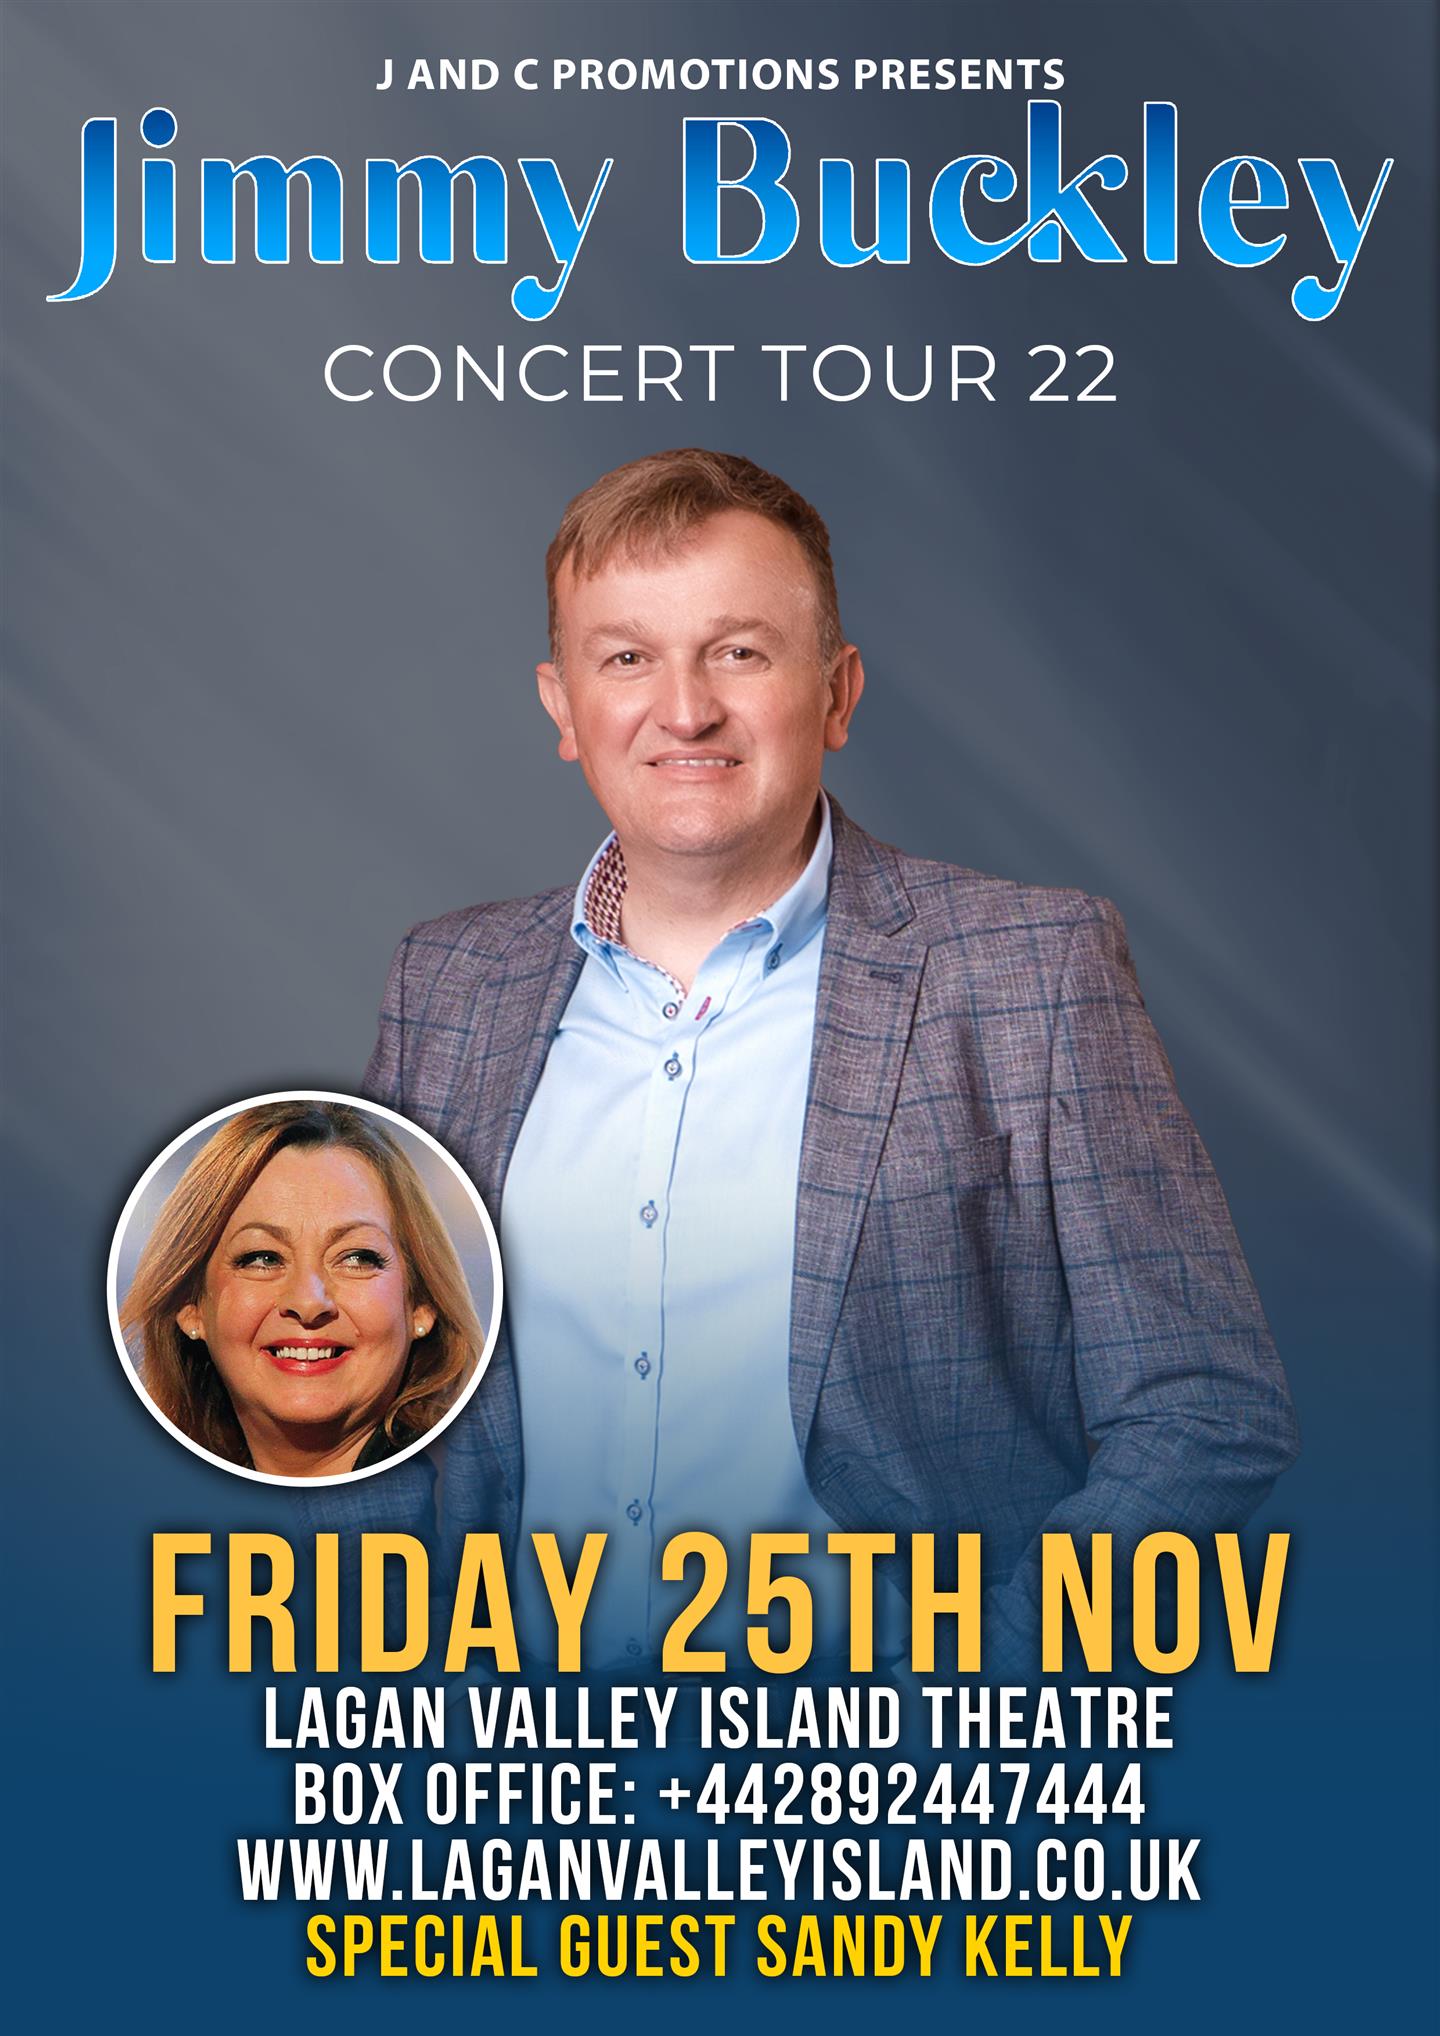 Jimmy Buckley in Concert with Special Guest Sandy Kelly